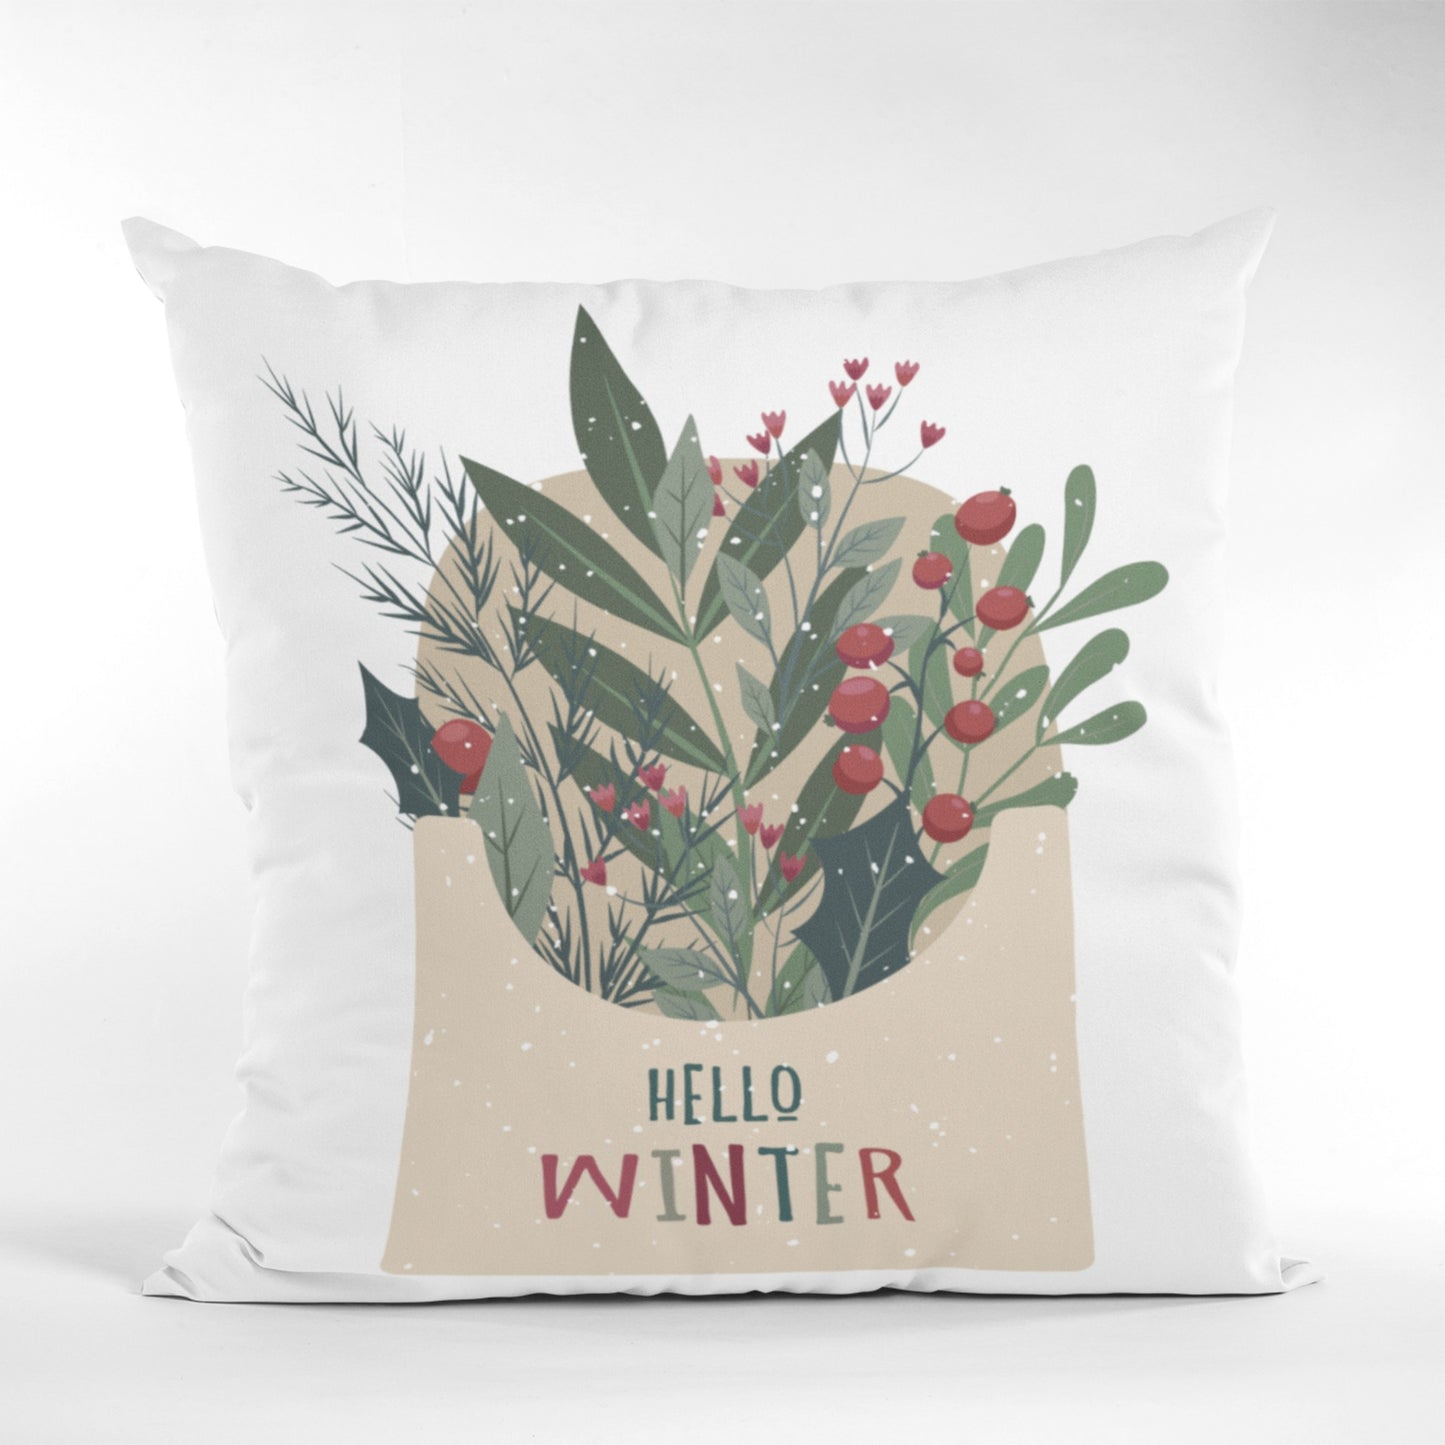 Cozy Pillow with a Hello Winter Floral Design